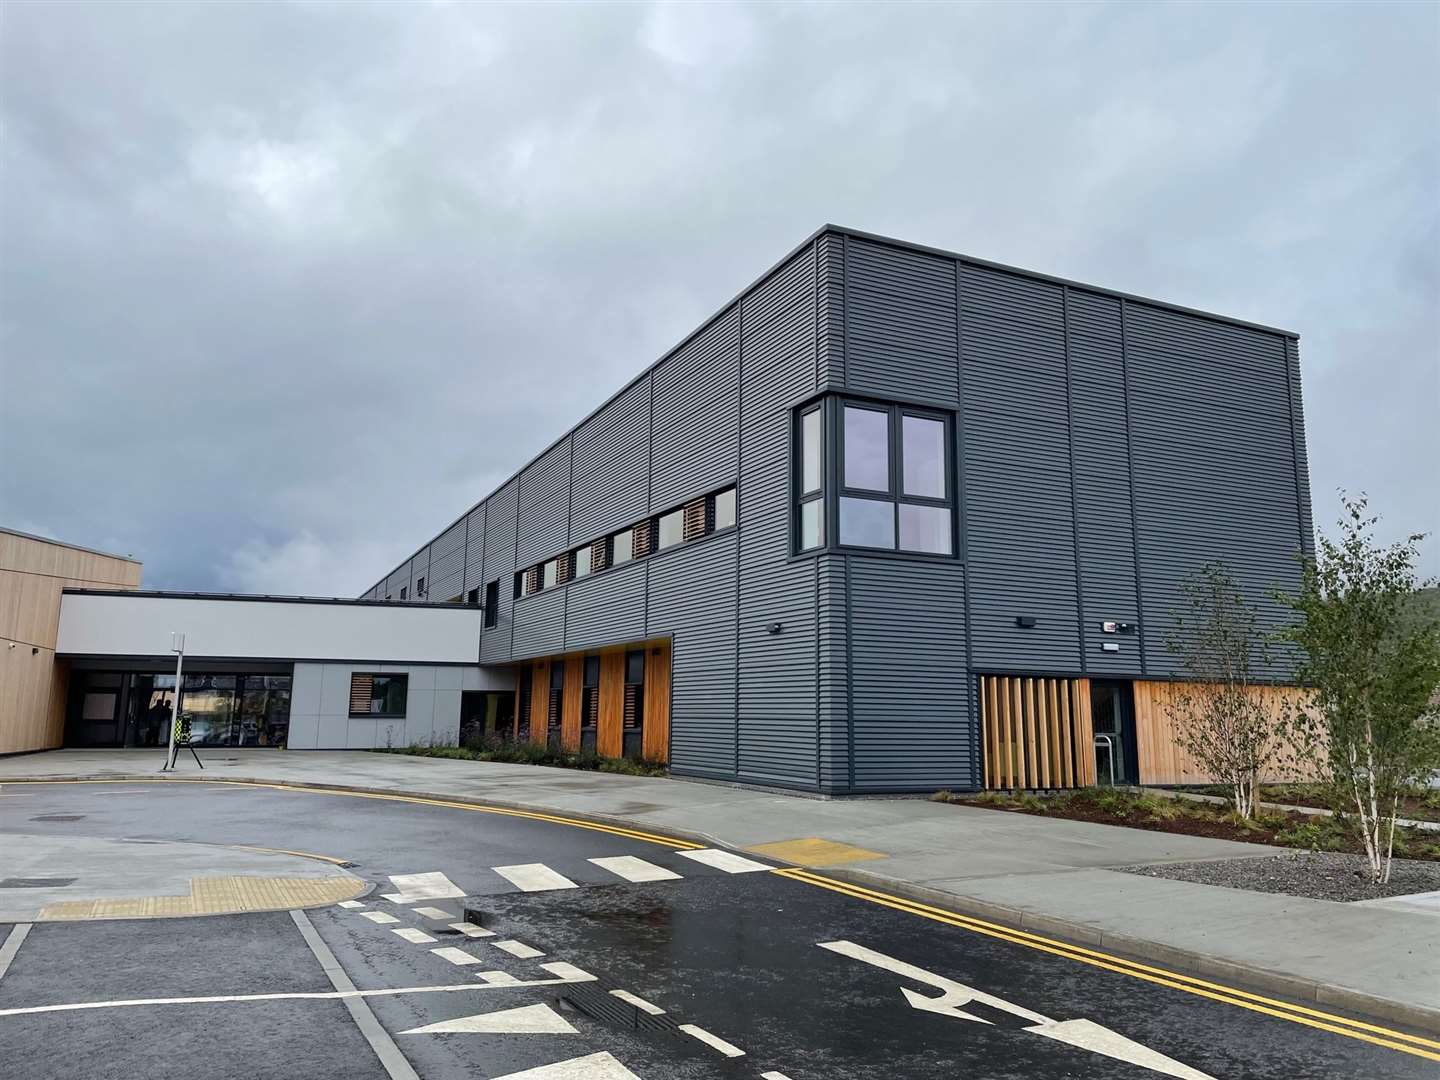 The new £20m Badenoch and Strathspey Community Hospital in Dalfaber, Aviemore.